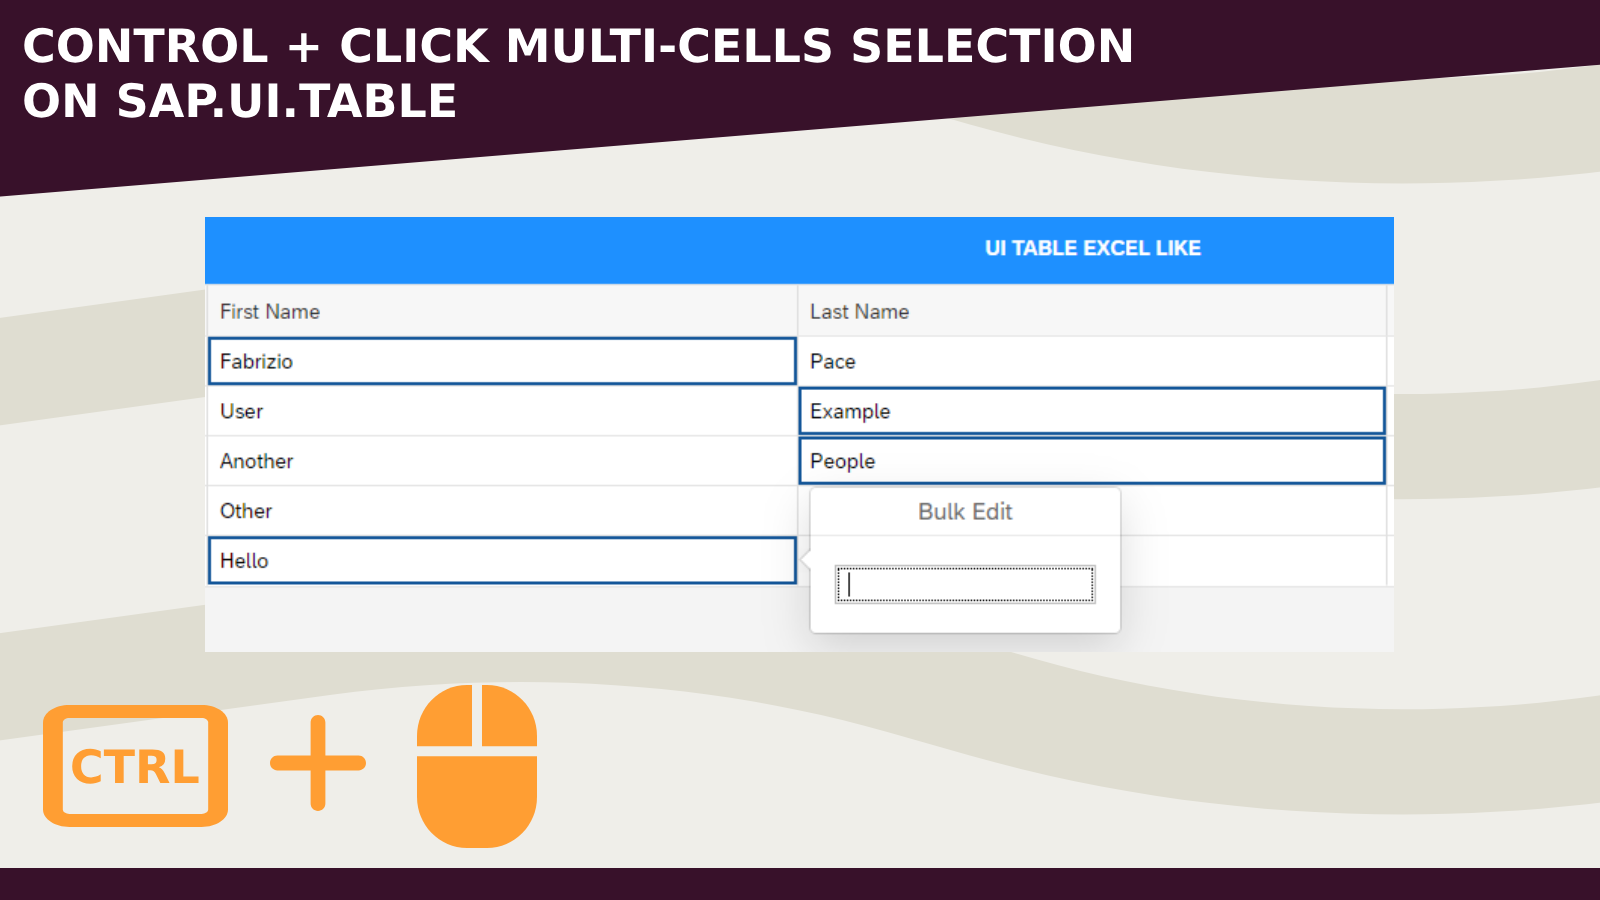 How to enable Control + Click multi-cells selection on sap.ui.table - Empower sap.ui.table with Excel-like functionalities (Part 2)